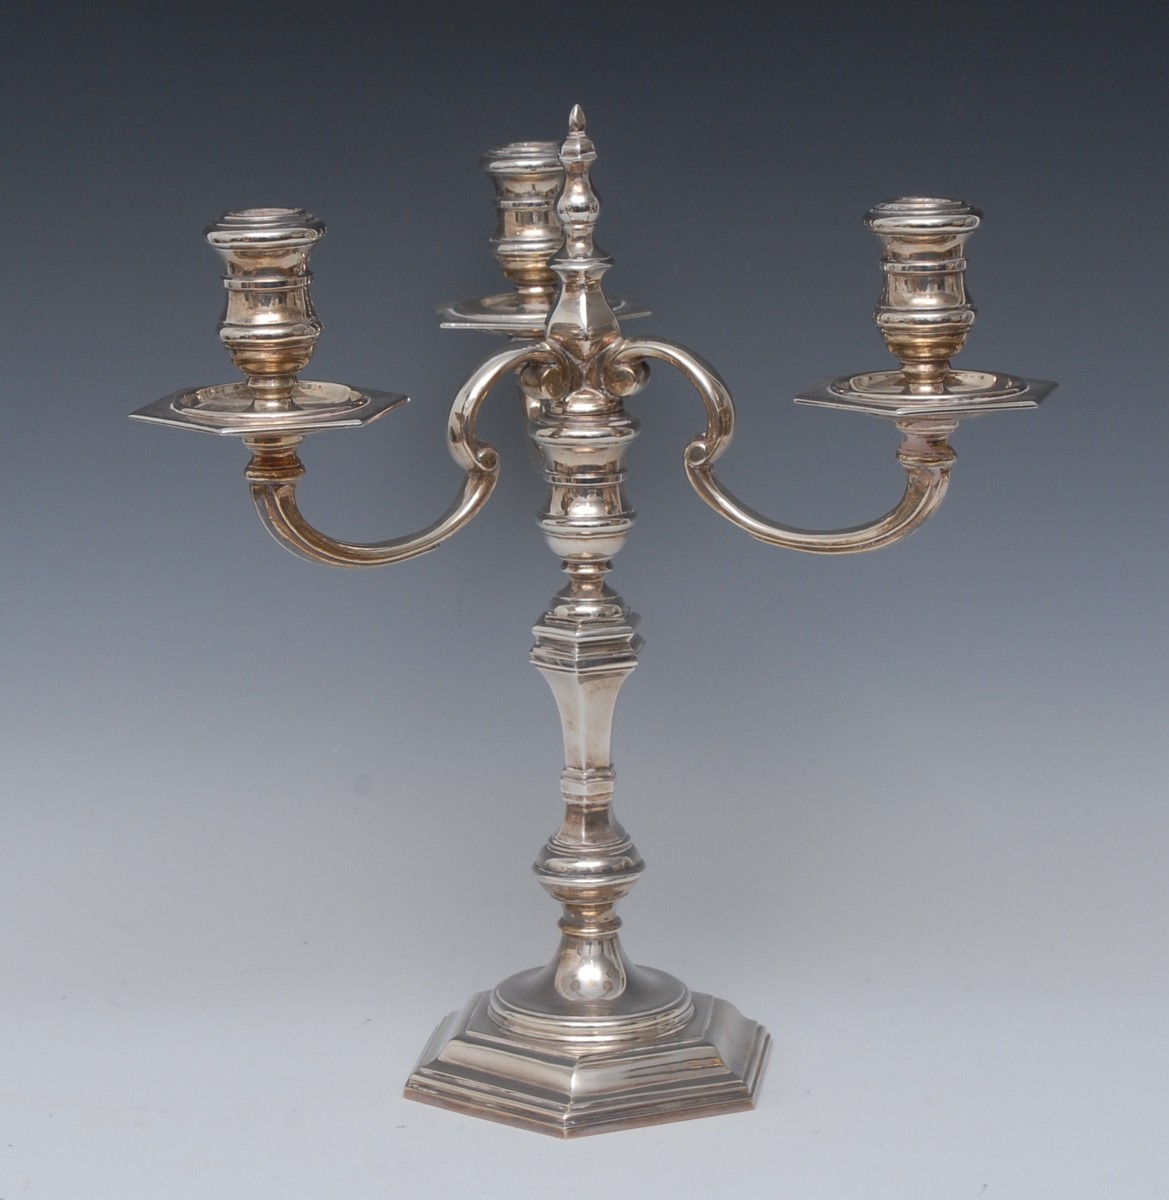 A George I style cast silver three-light table candelabrum, knop finial,